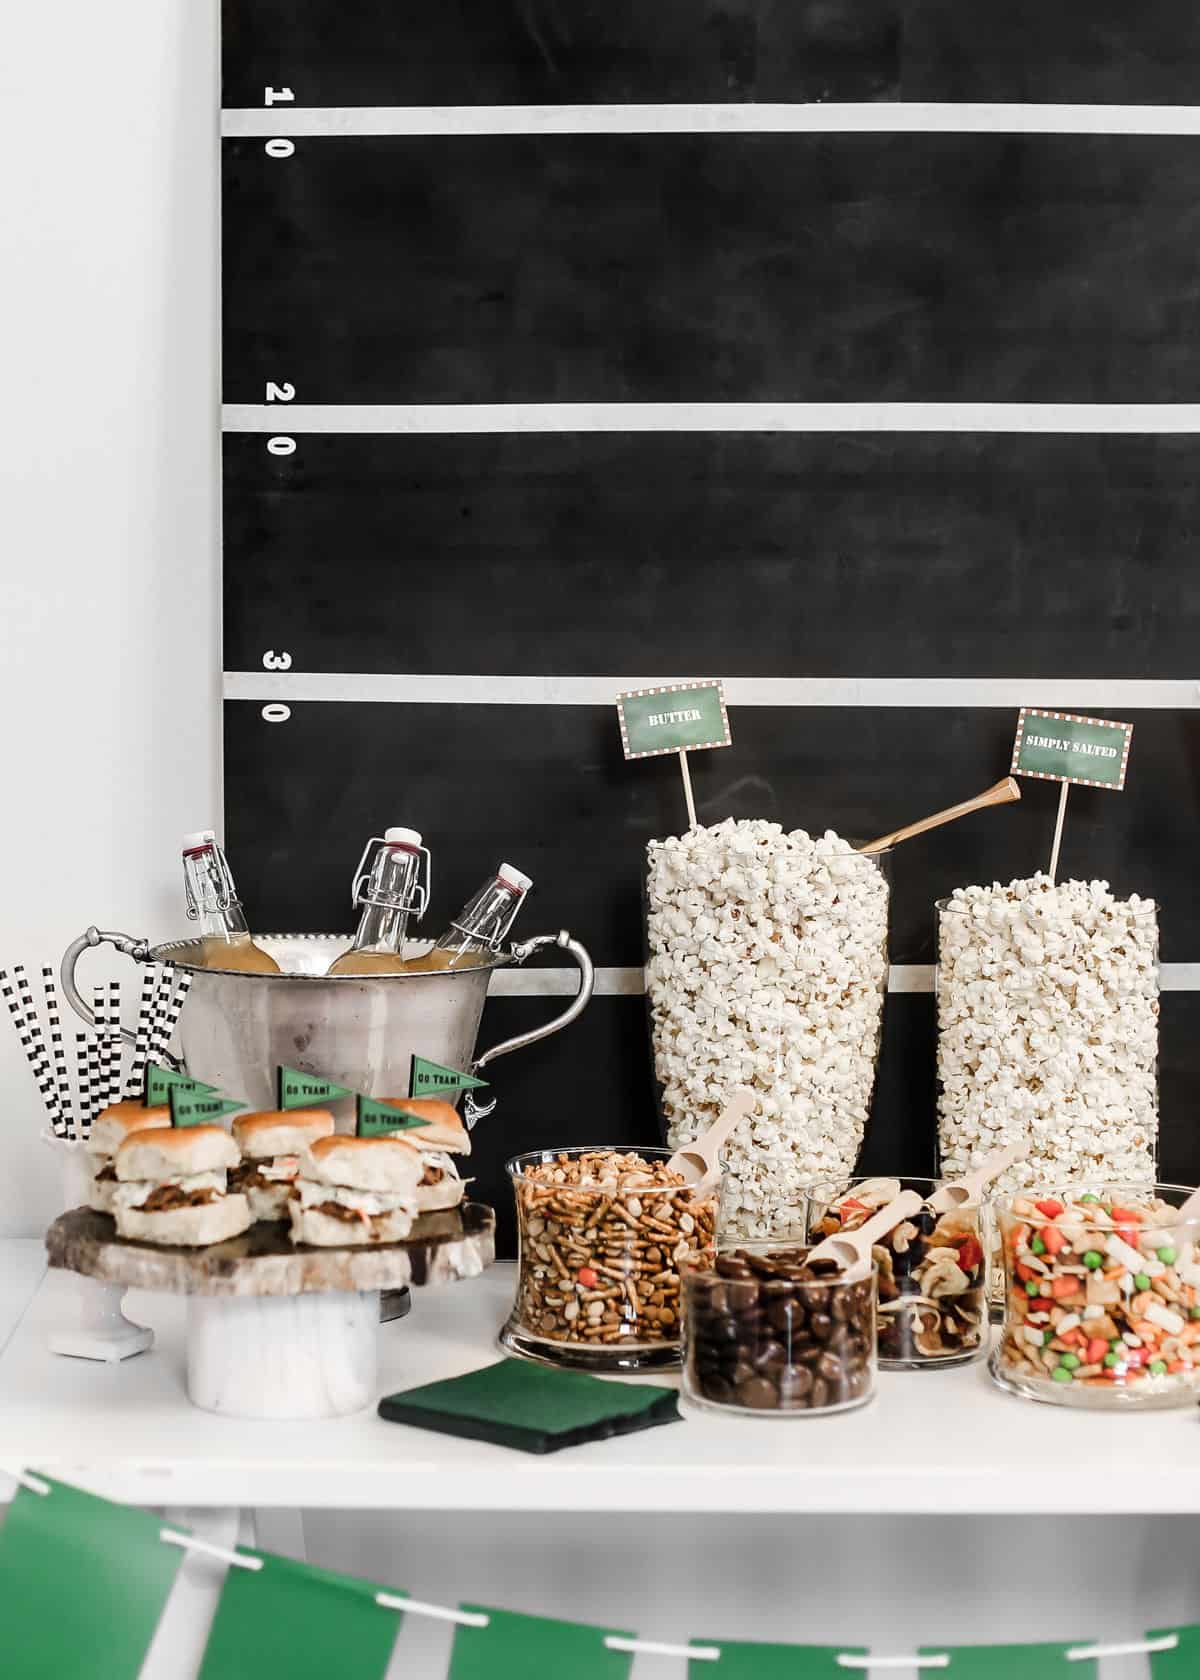 snack buffet with mini sandwiches, popcorn in jars, and drink bottles in silver urn.